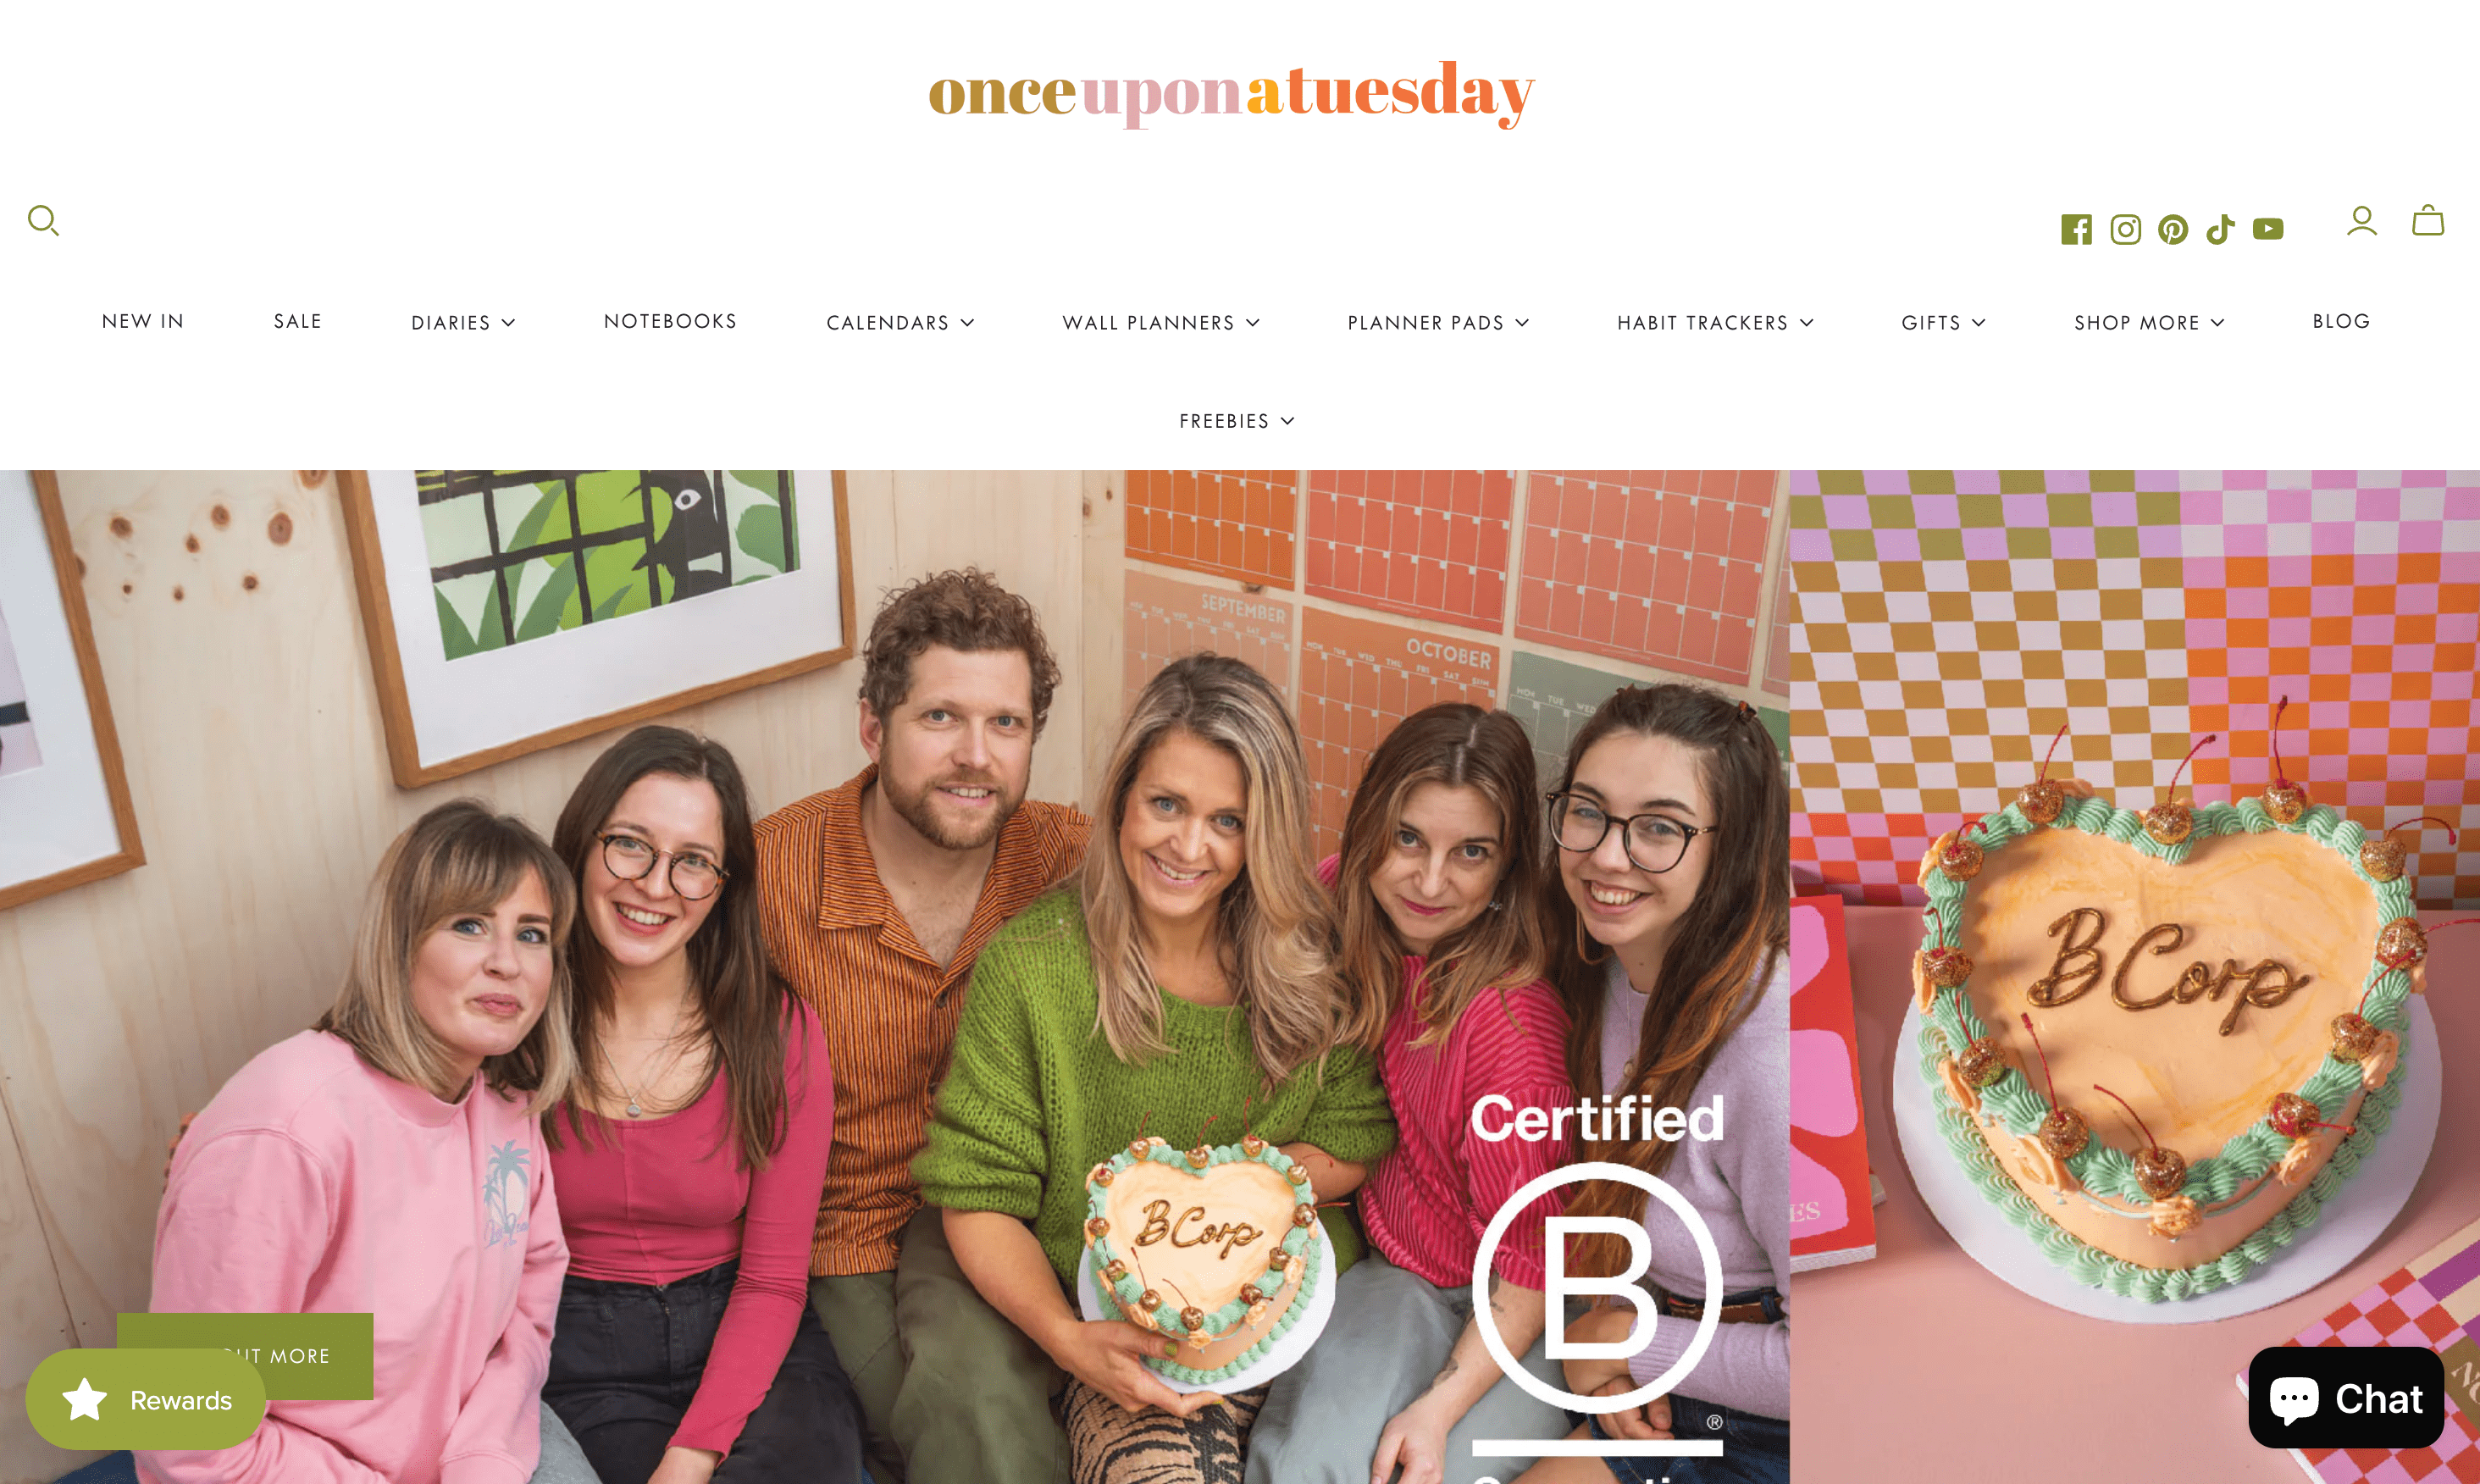 A screenshot of Once Upon a Tuesday’s homepage showing a banner image that highlights its recent BCORP certification. 